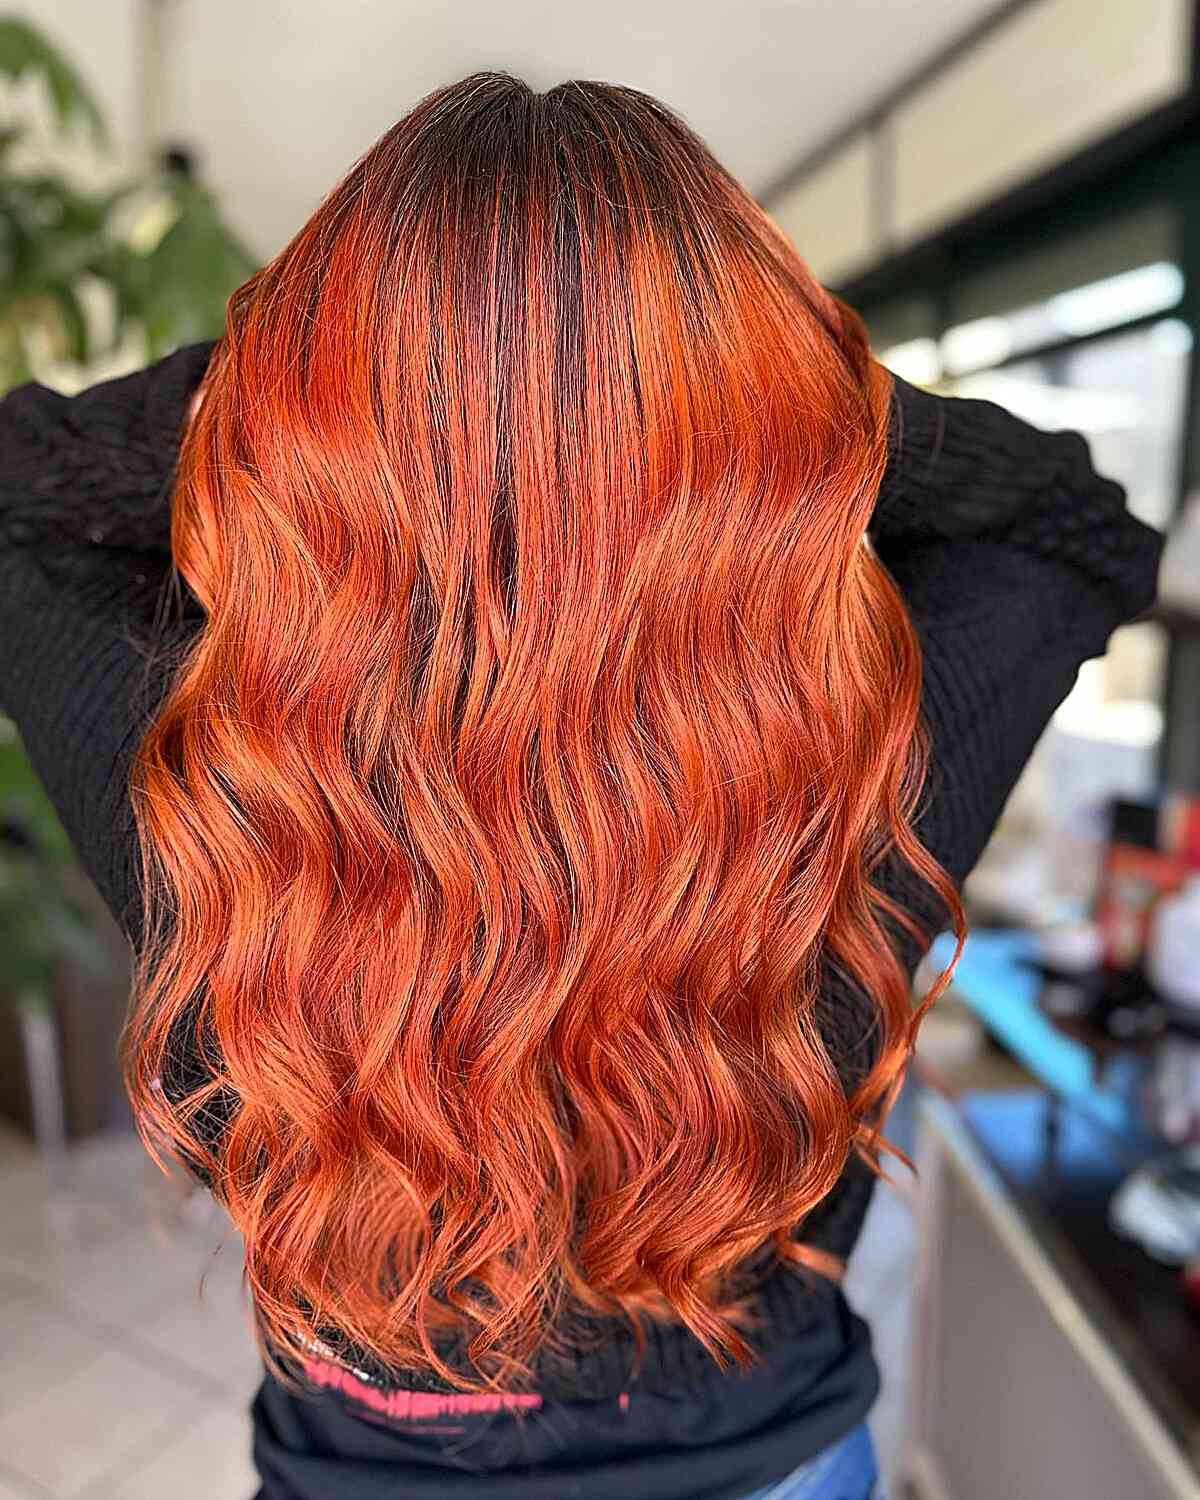 Wavy Hair Colored in A Bright Orangish-Red